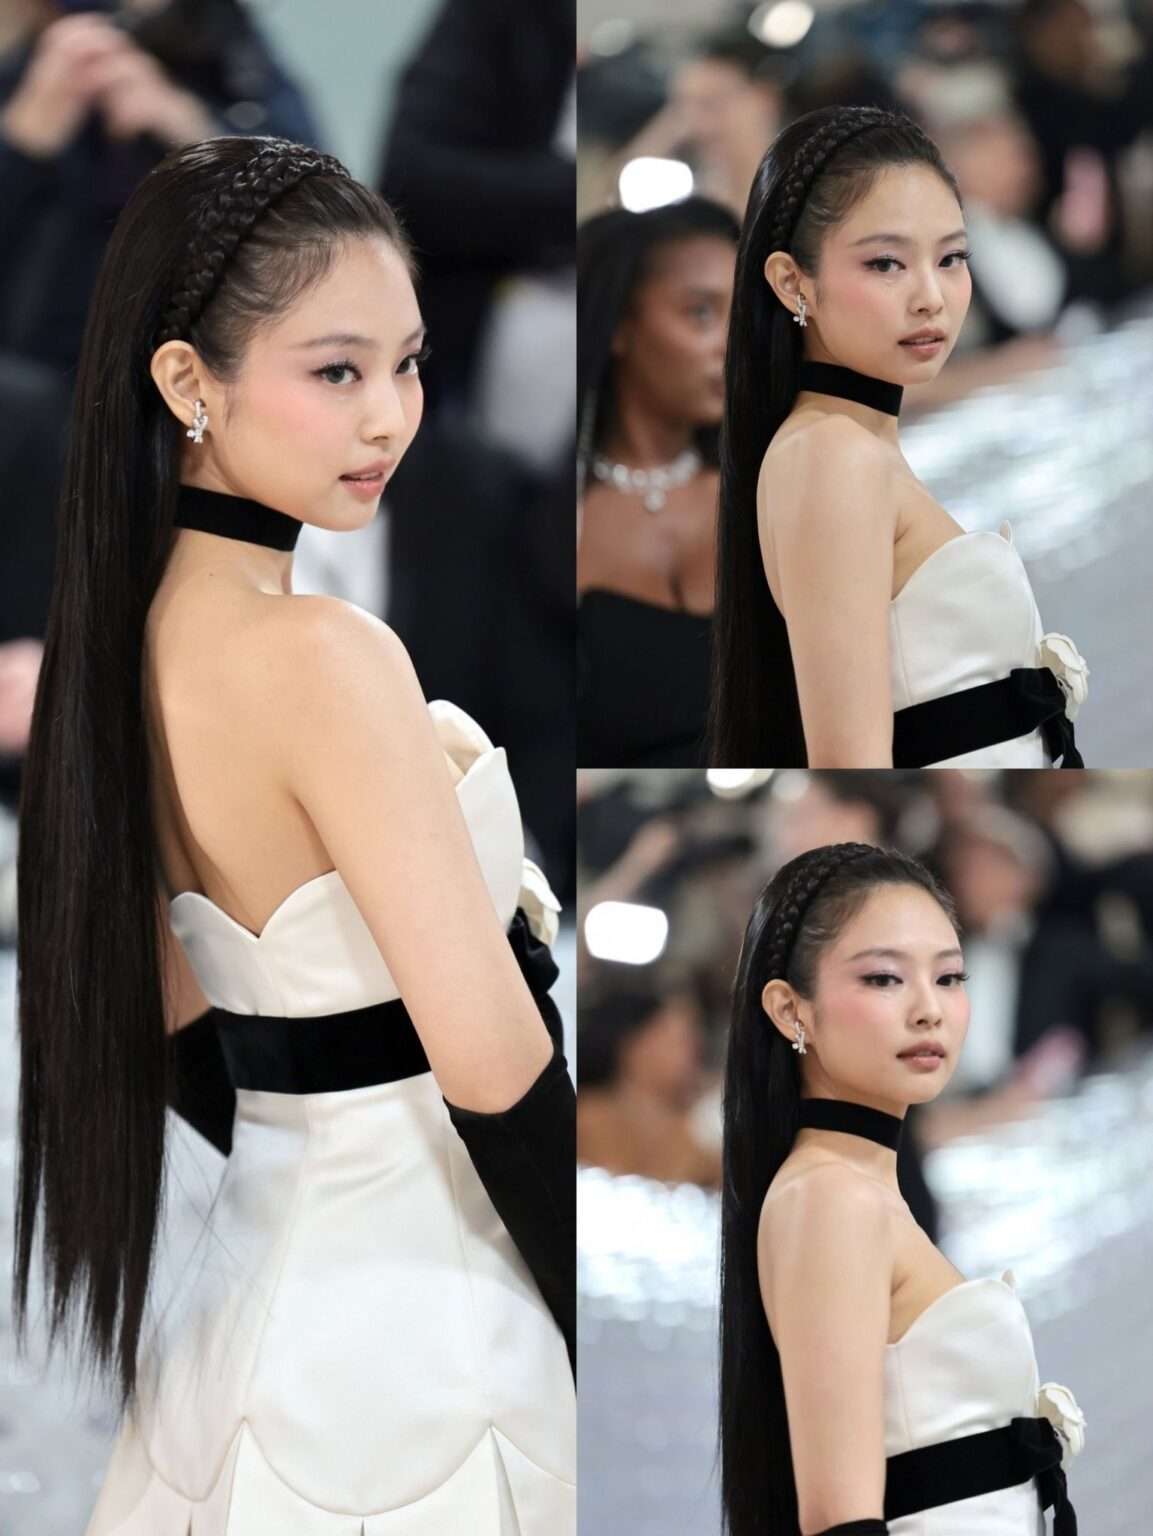 Jennie was chosen as the best dressed star at the Met Gala Pannkpop